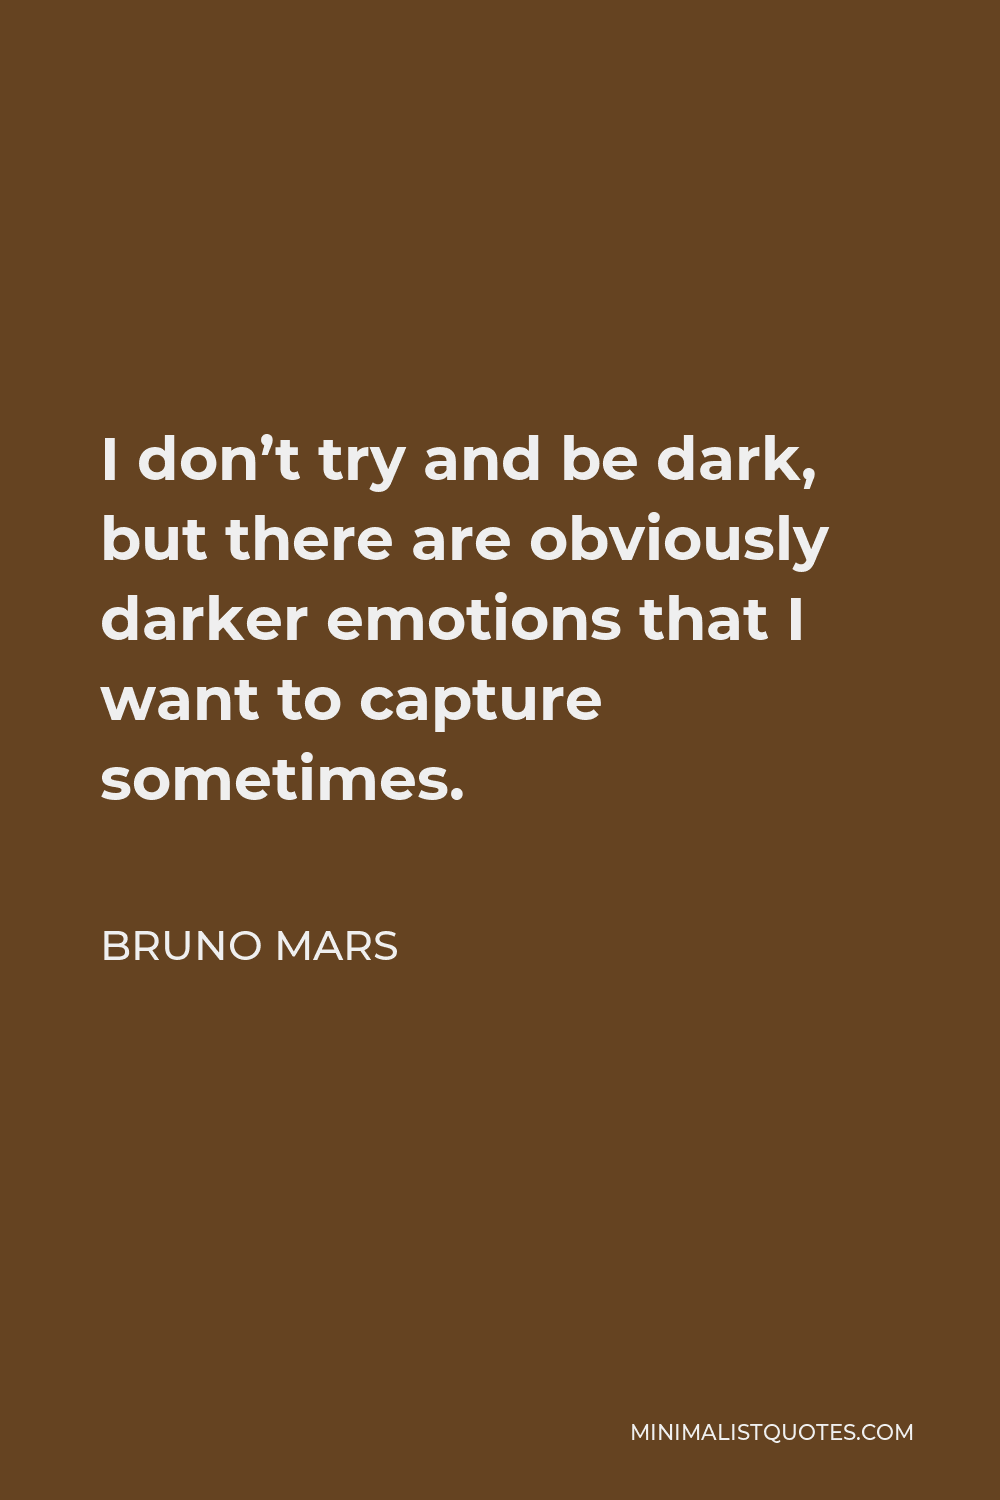 Bruno Mars Quote - I don’t try and be dark, but there are obviously darker emotions that I want to capture sometimes.